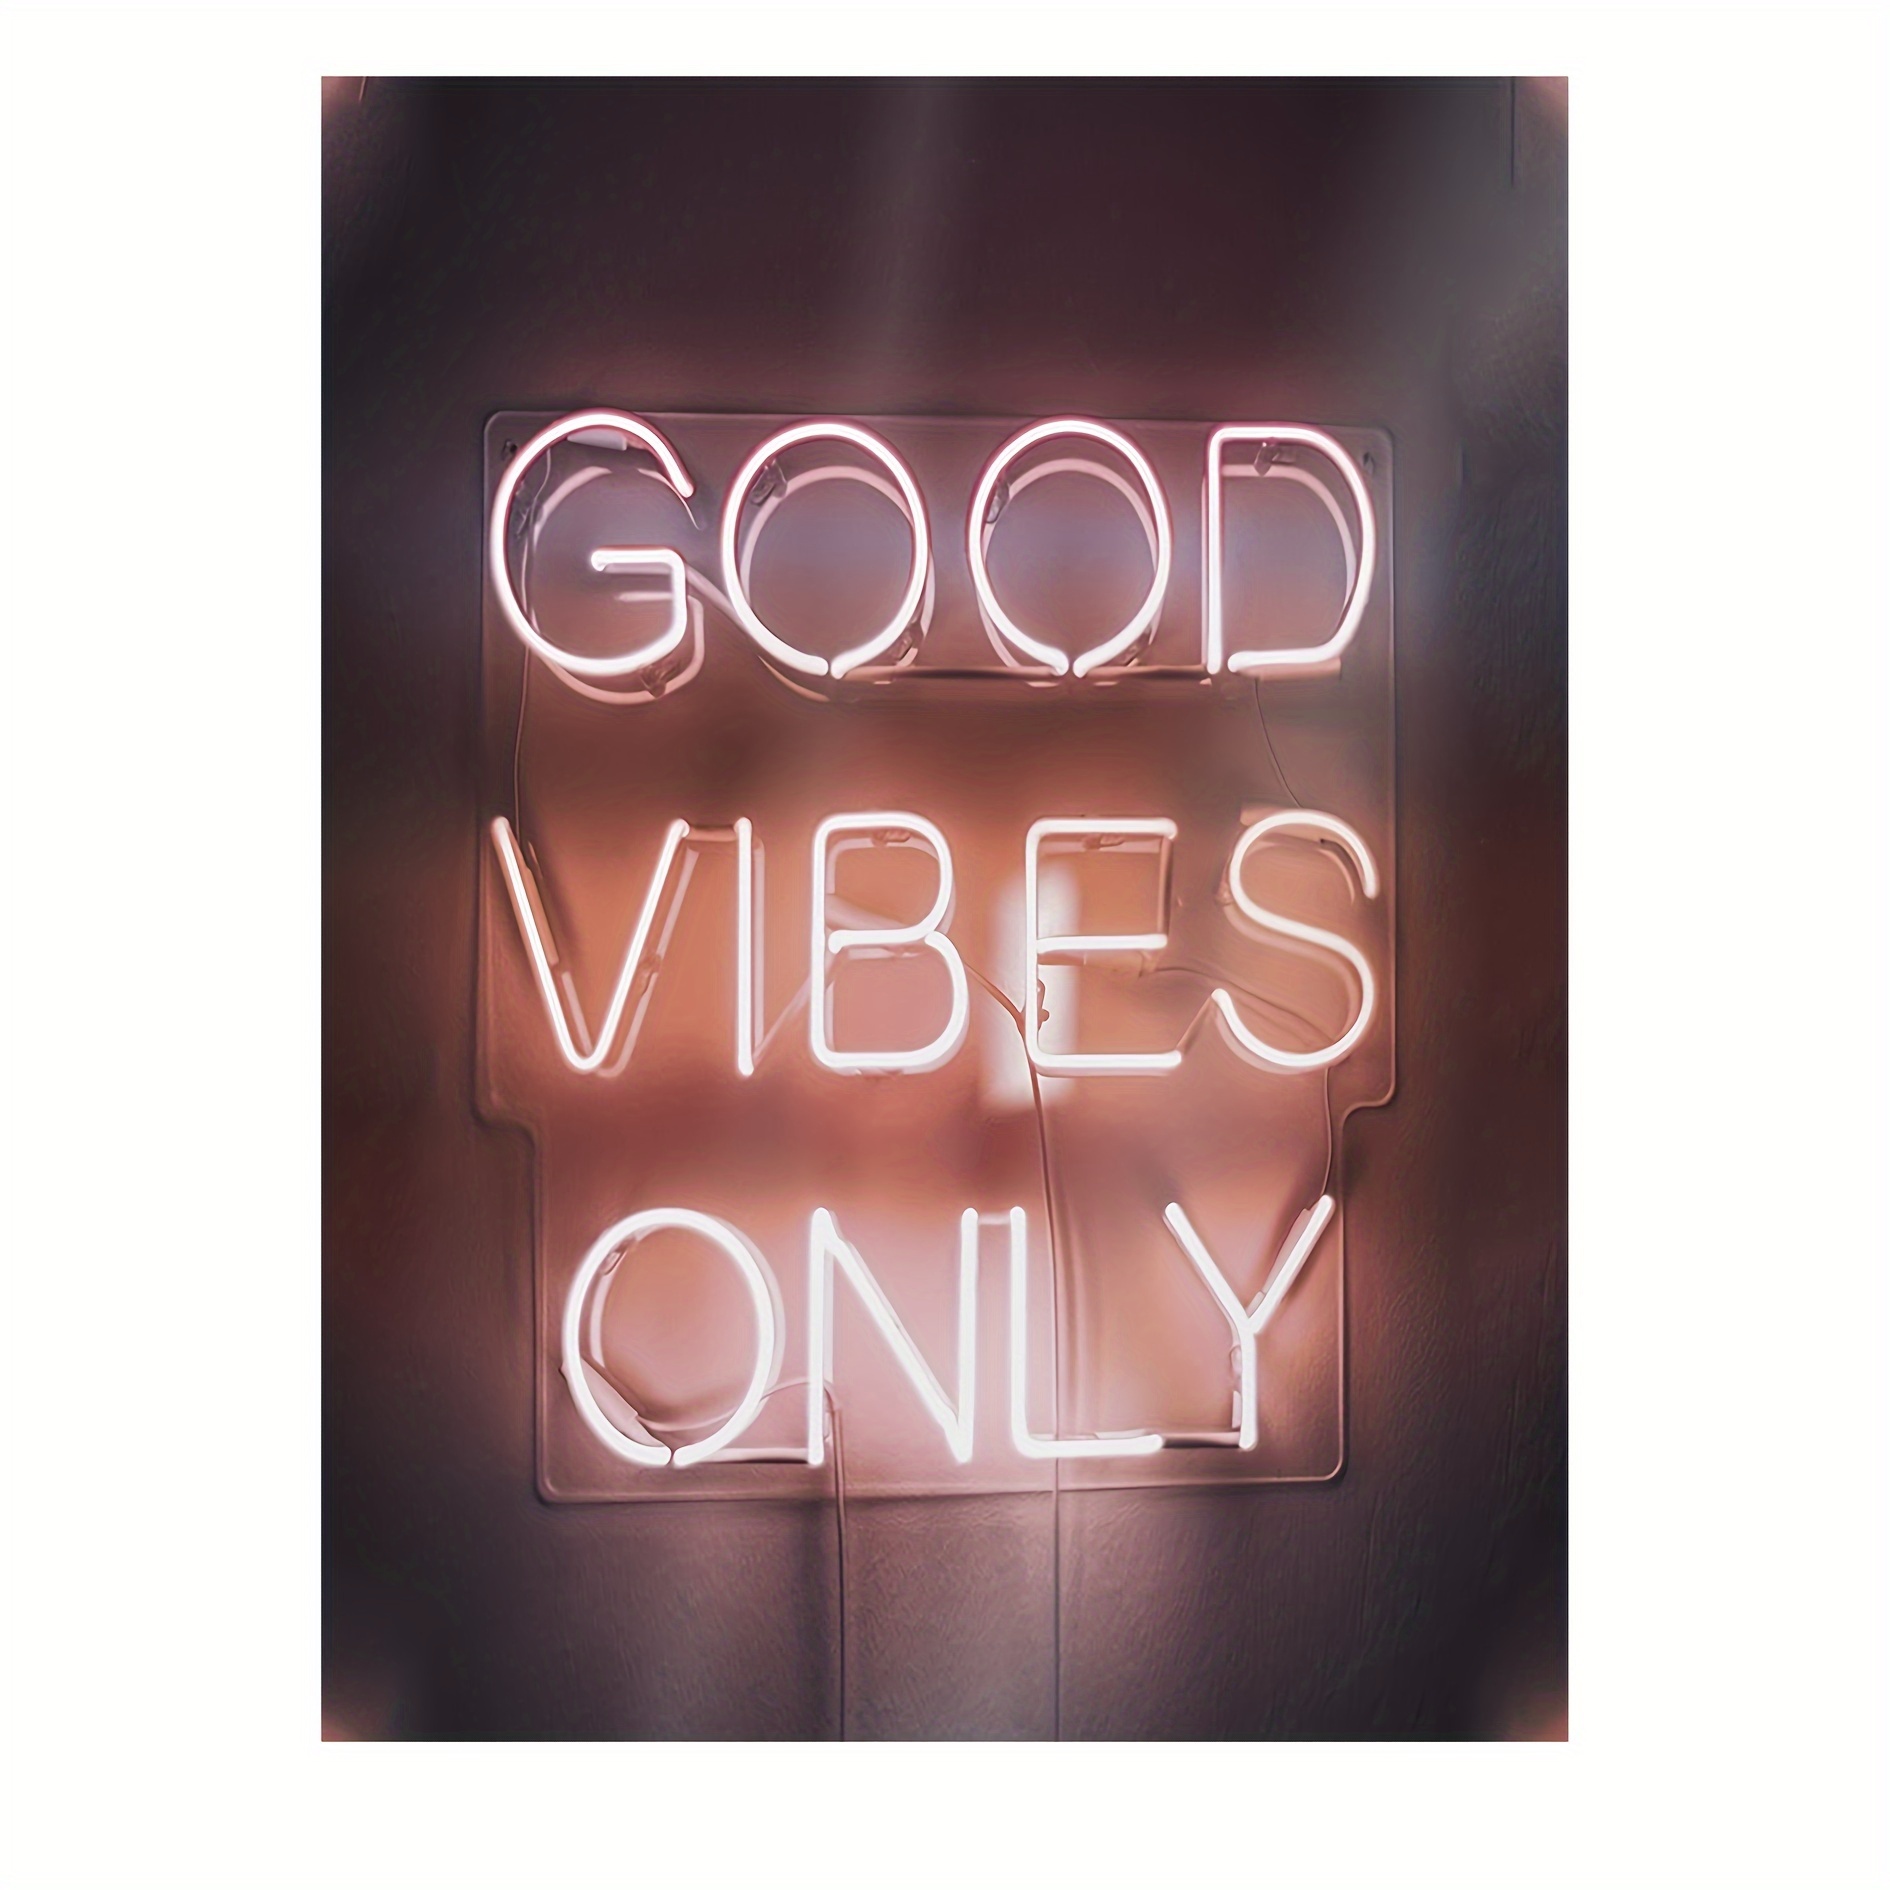 

motivational Chic" Good " Neon Sign Canvas Wall Art - Inspirational Unframed Poster For Home & Office Decor, Perfect For Living Room, Bedroom, Kitchen, And More - 12x16 Inches